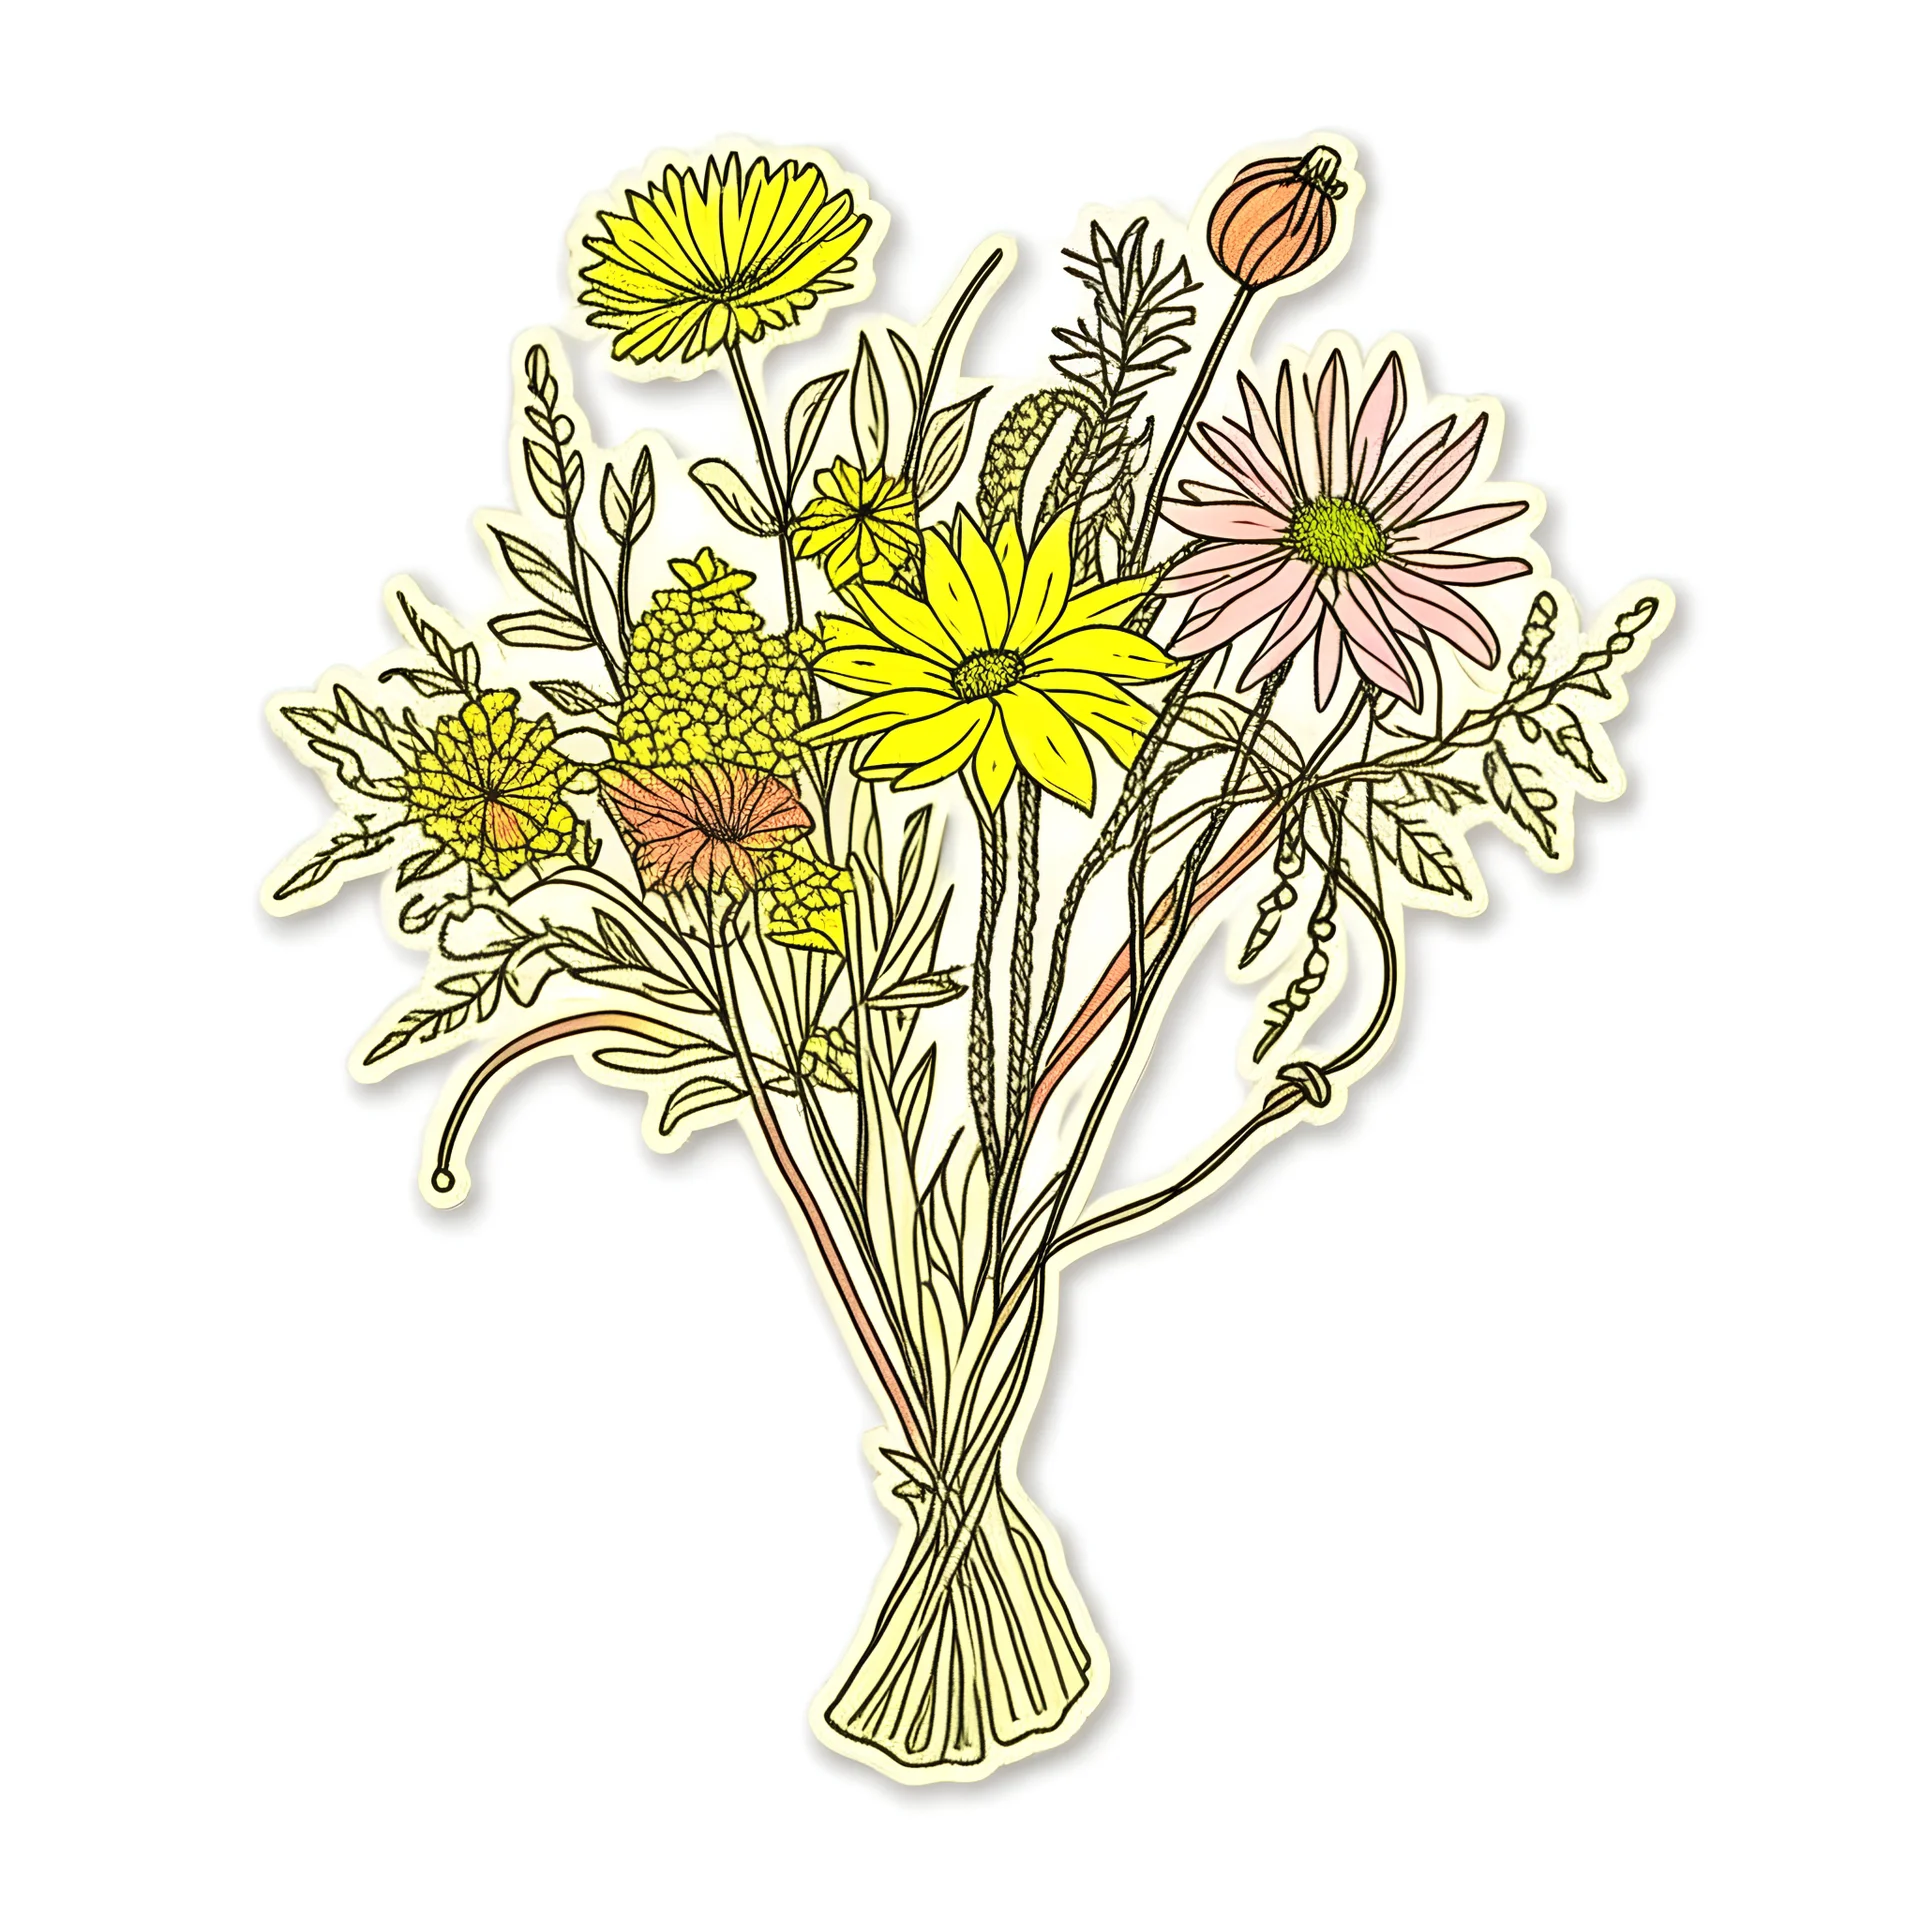 A bouquet of hand-drawn wildflowers in earthy tones, tied together with twine sticker on white background.